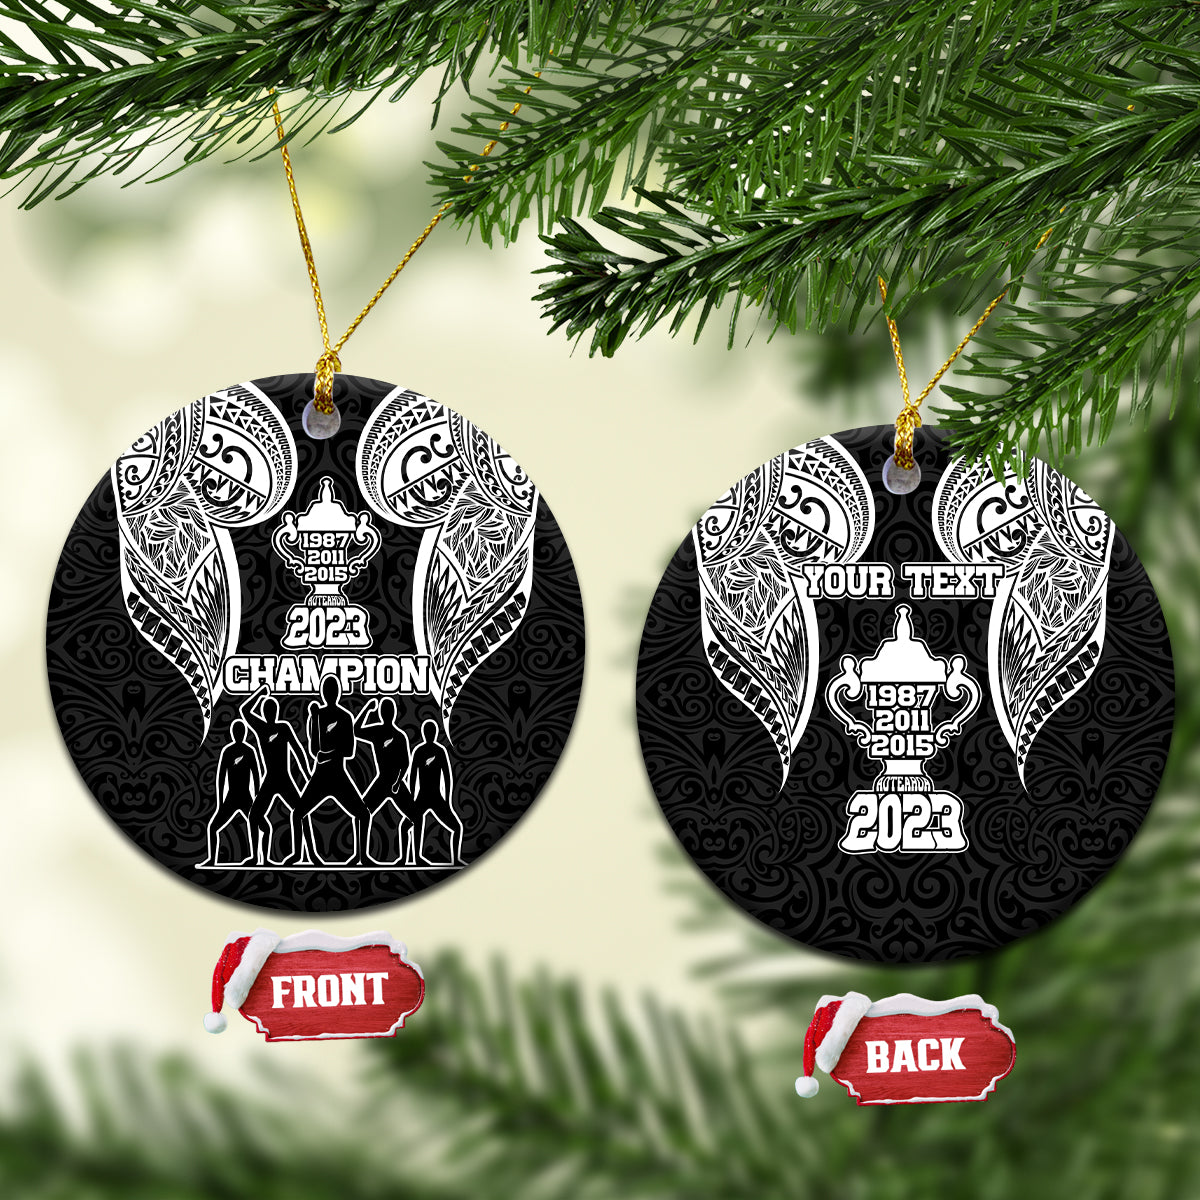 Personalised New Zealand Rugby Ceramic Ornament Aotearoa Champion Cup History with Haka Dance LT03 Circle Black - Polynesian Pride